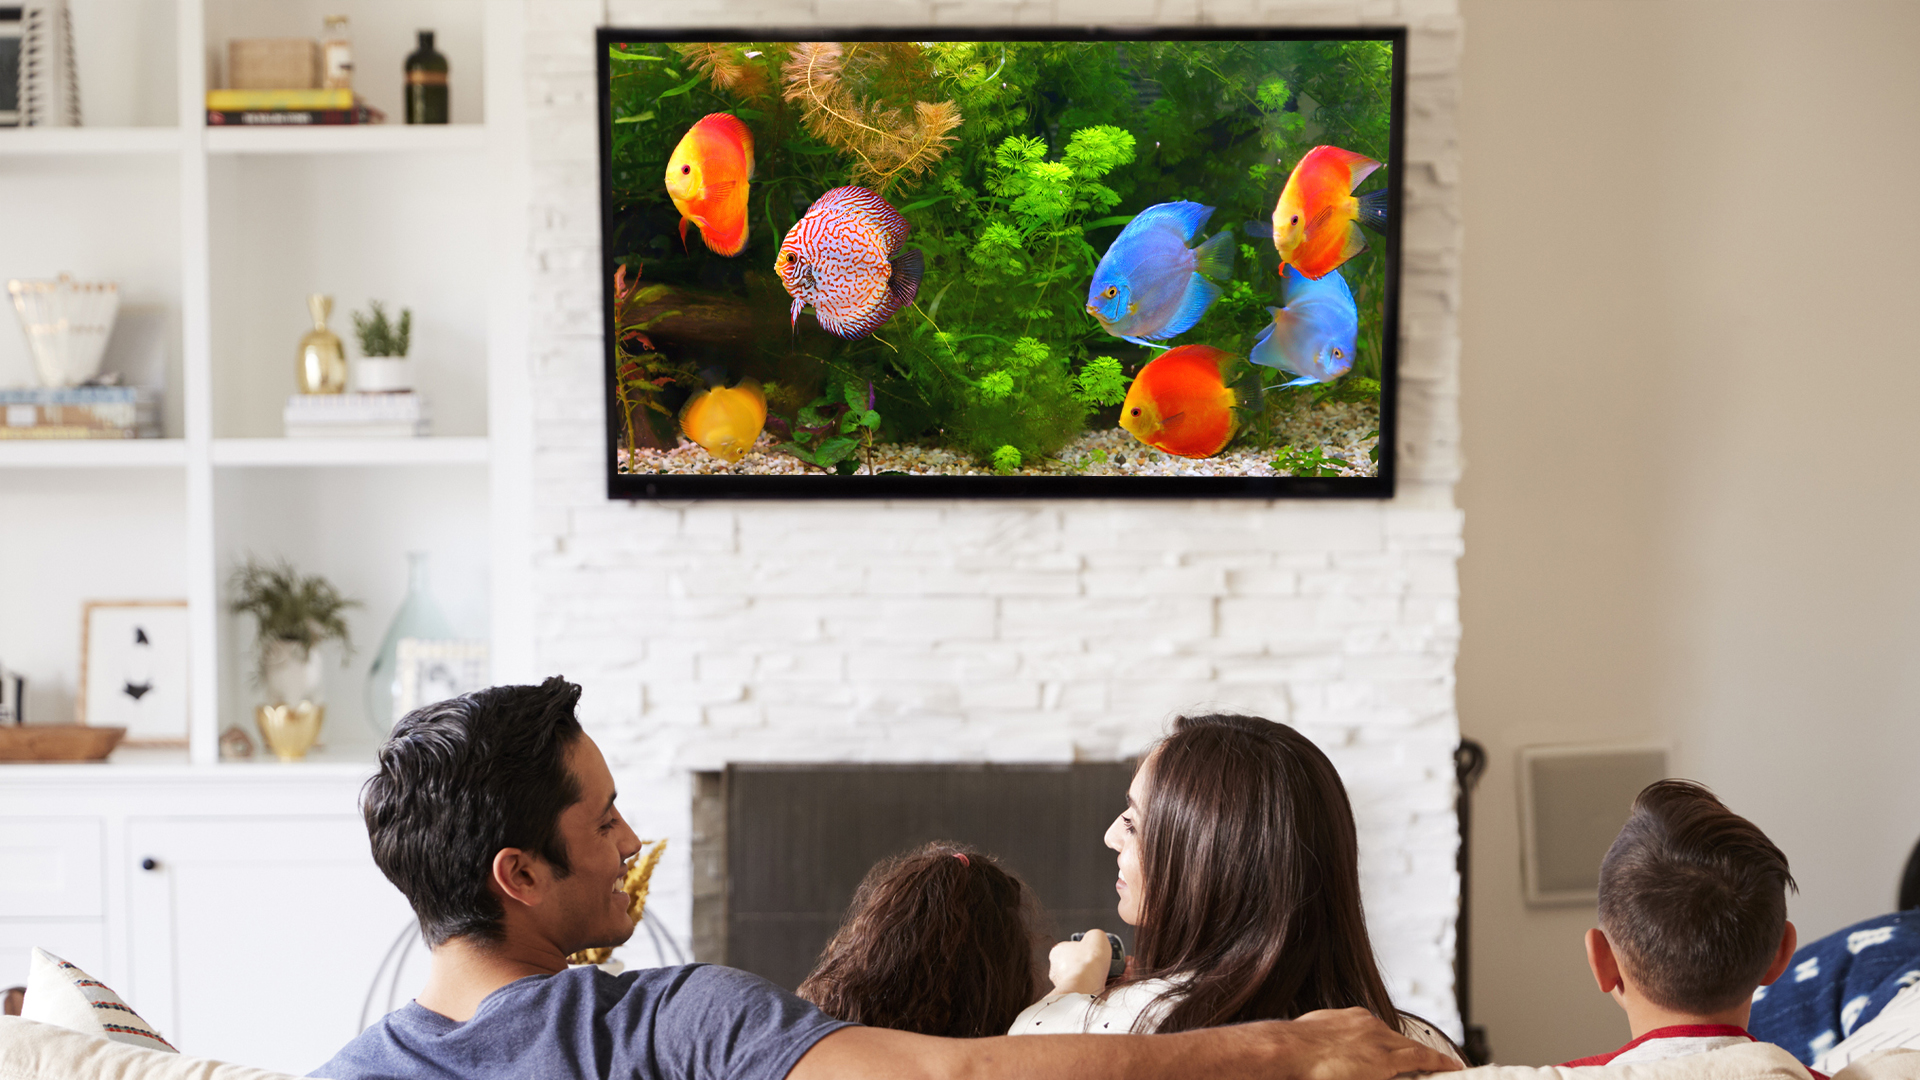 A family watching a TV show about fish